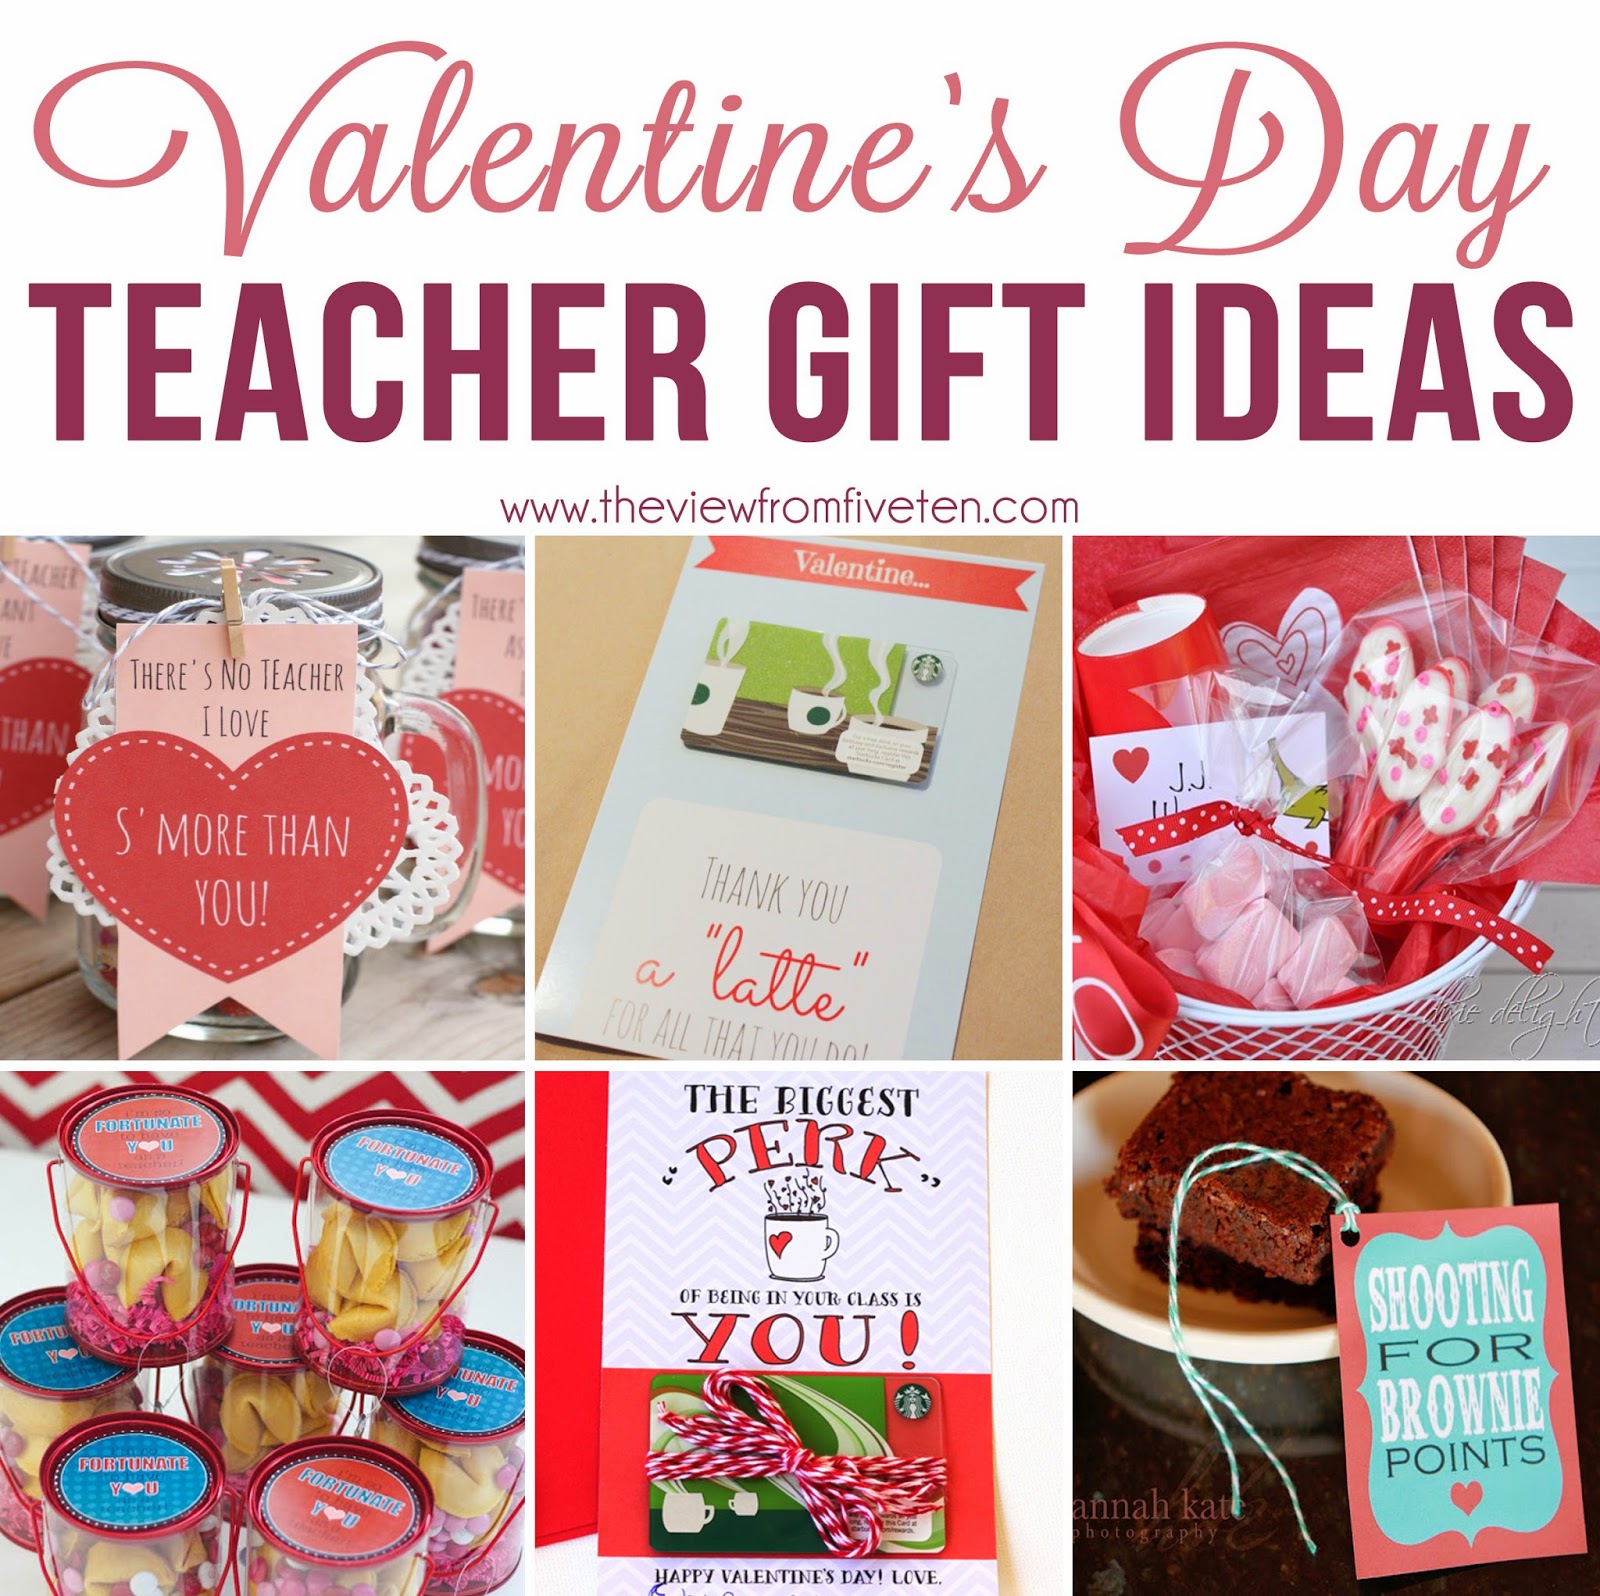 the-view-from-510-valentine-s-day-gift-ideas-for-teachers